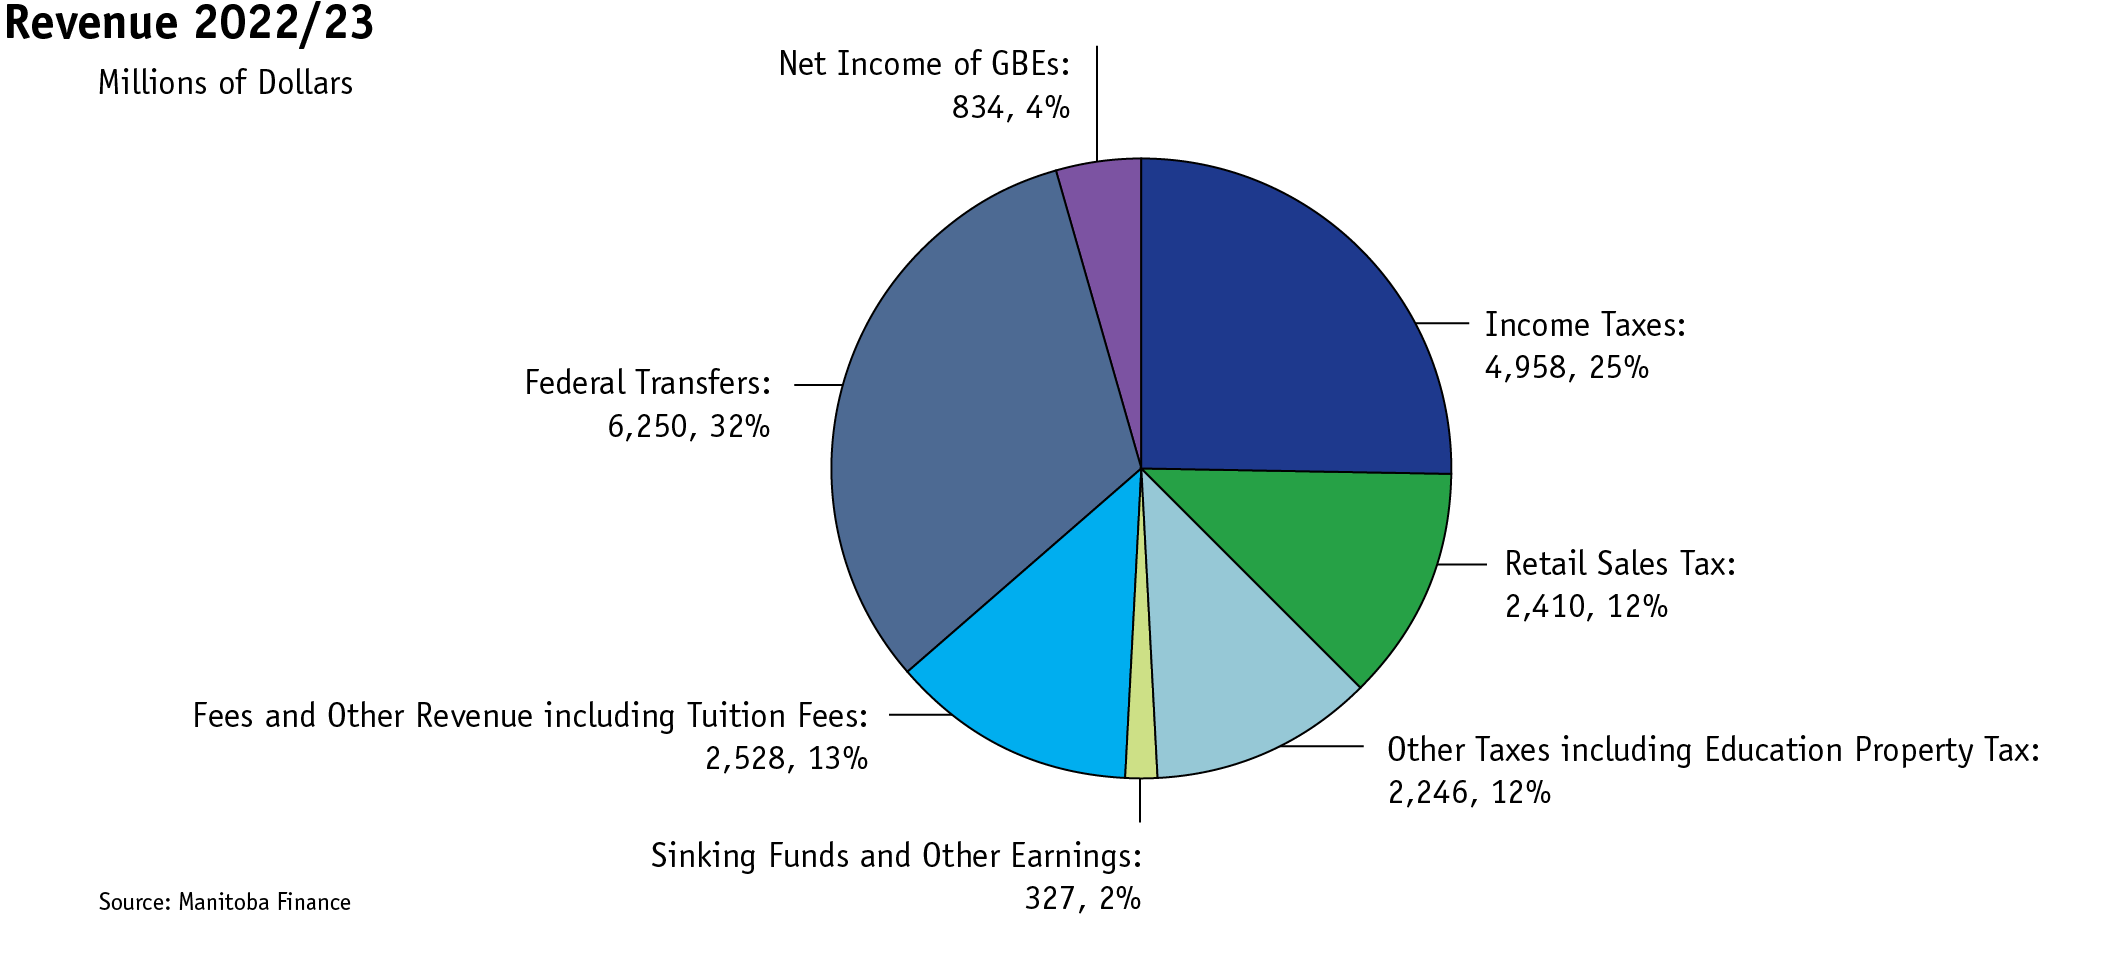 pie chart showing the revenue budget by category for 2022/23